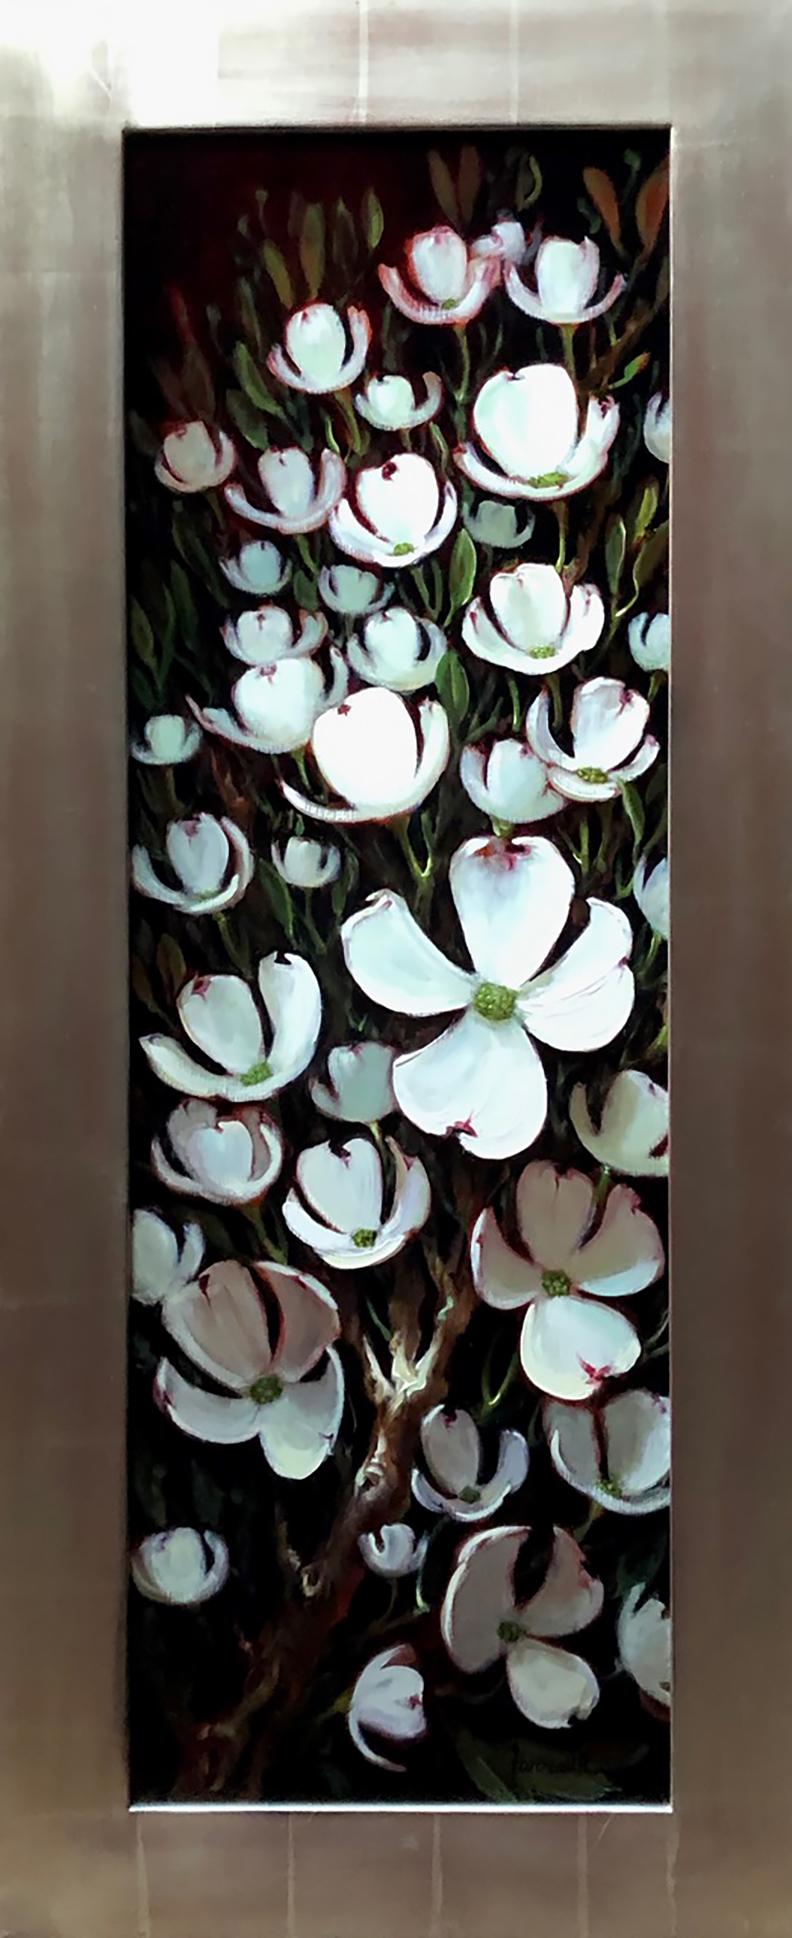 Sean Farrell, "A Flurry of Dogwoods" 36x12 Realism White Floral Oil Painting 